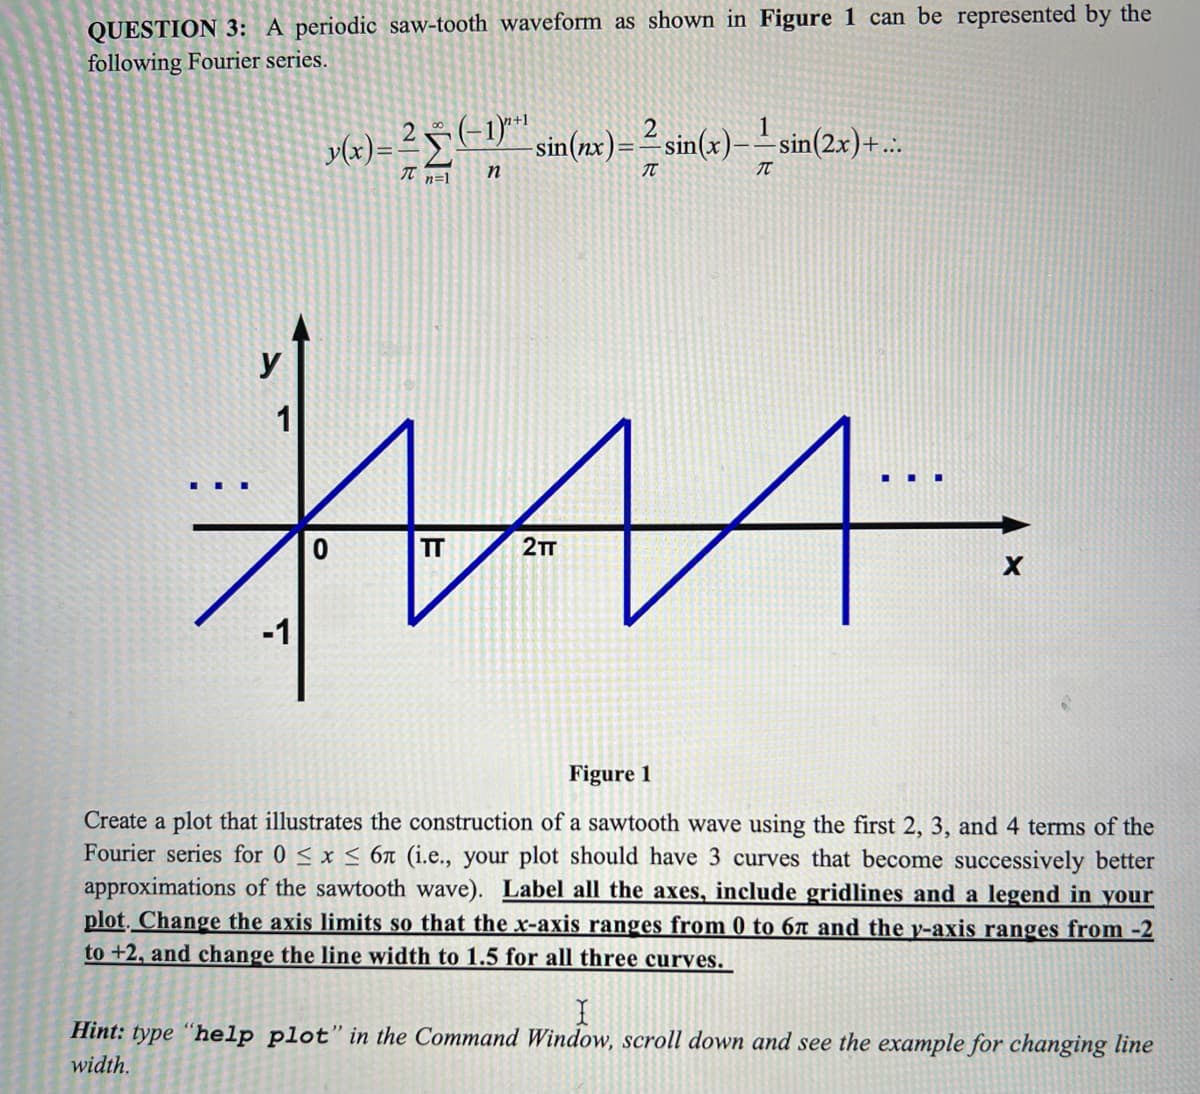 QUESTION 3: A periodic saw-tooth waveform as shown in Figure 1 can be represented by the
following Fourier series.
2
y(x) = ² (-1)^" sin(x) = ² sin(x)---sin(2x)+...
20 (-1)″*¹
π n=1
n
T
T
HAA.
1...
2TT
-1
TT
X
Figure 1
Create a plot that illustrates the construction of a sawtooth wave using the first 2, 3, and 4 terms of the
Fourier series for 0 ≤ x ≤ 6n (i.e., your plot should have 3 curves that become successively better
approximations of the sawtooth wave). Label all the axes, include gridlines and a legend in your
plot. Change the axis limits so that the x-axis ranges from 0 to 67 and the v-axis ranges from -2
to +2, and change the line width to 1.5 for all three curves.
I
Hint: type "help plot" in the Command Window, scroll down and see the example for changing line
width.